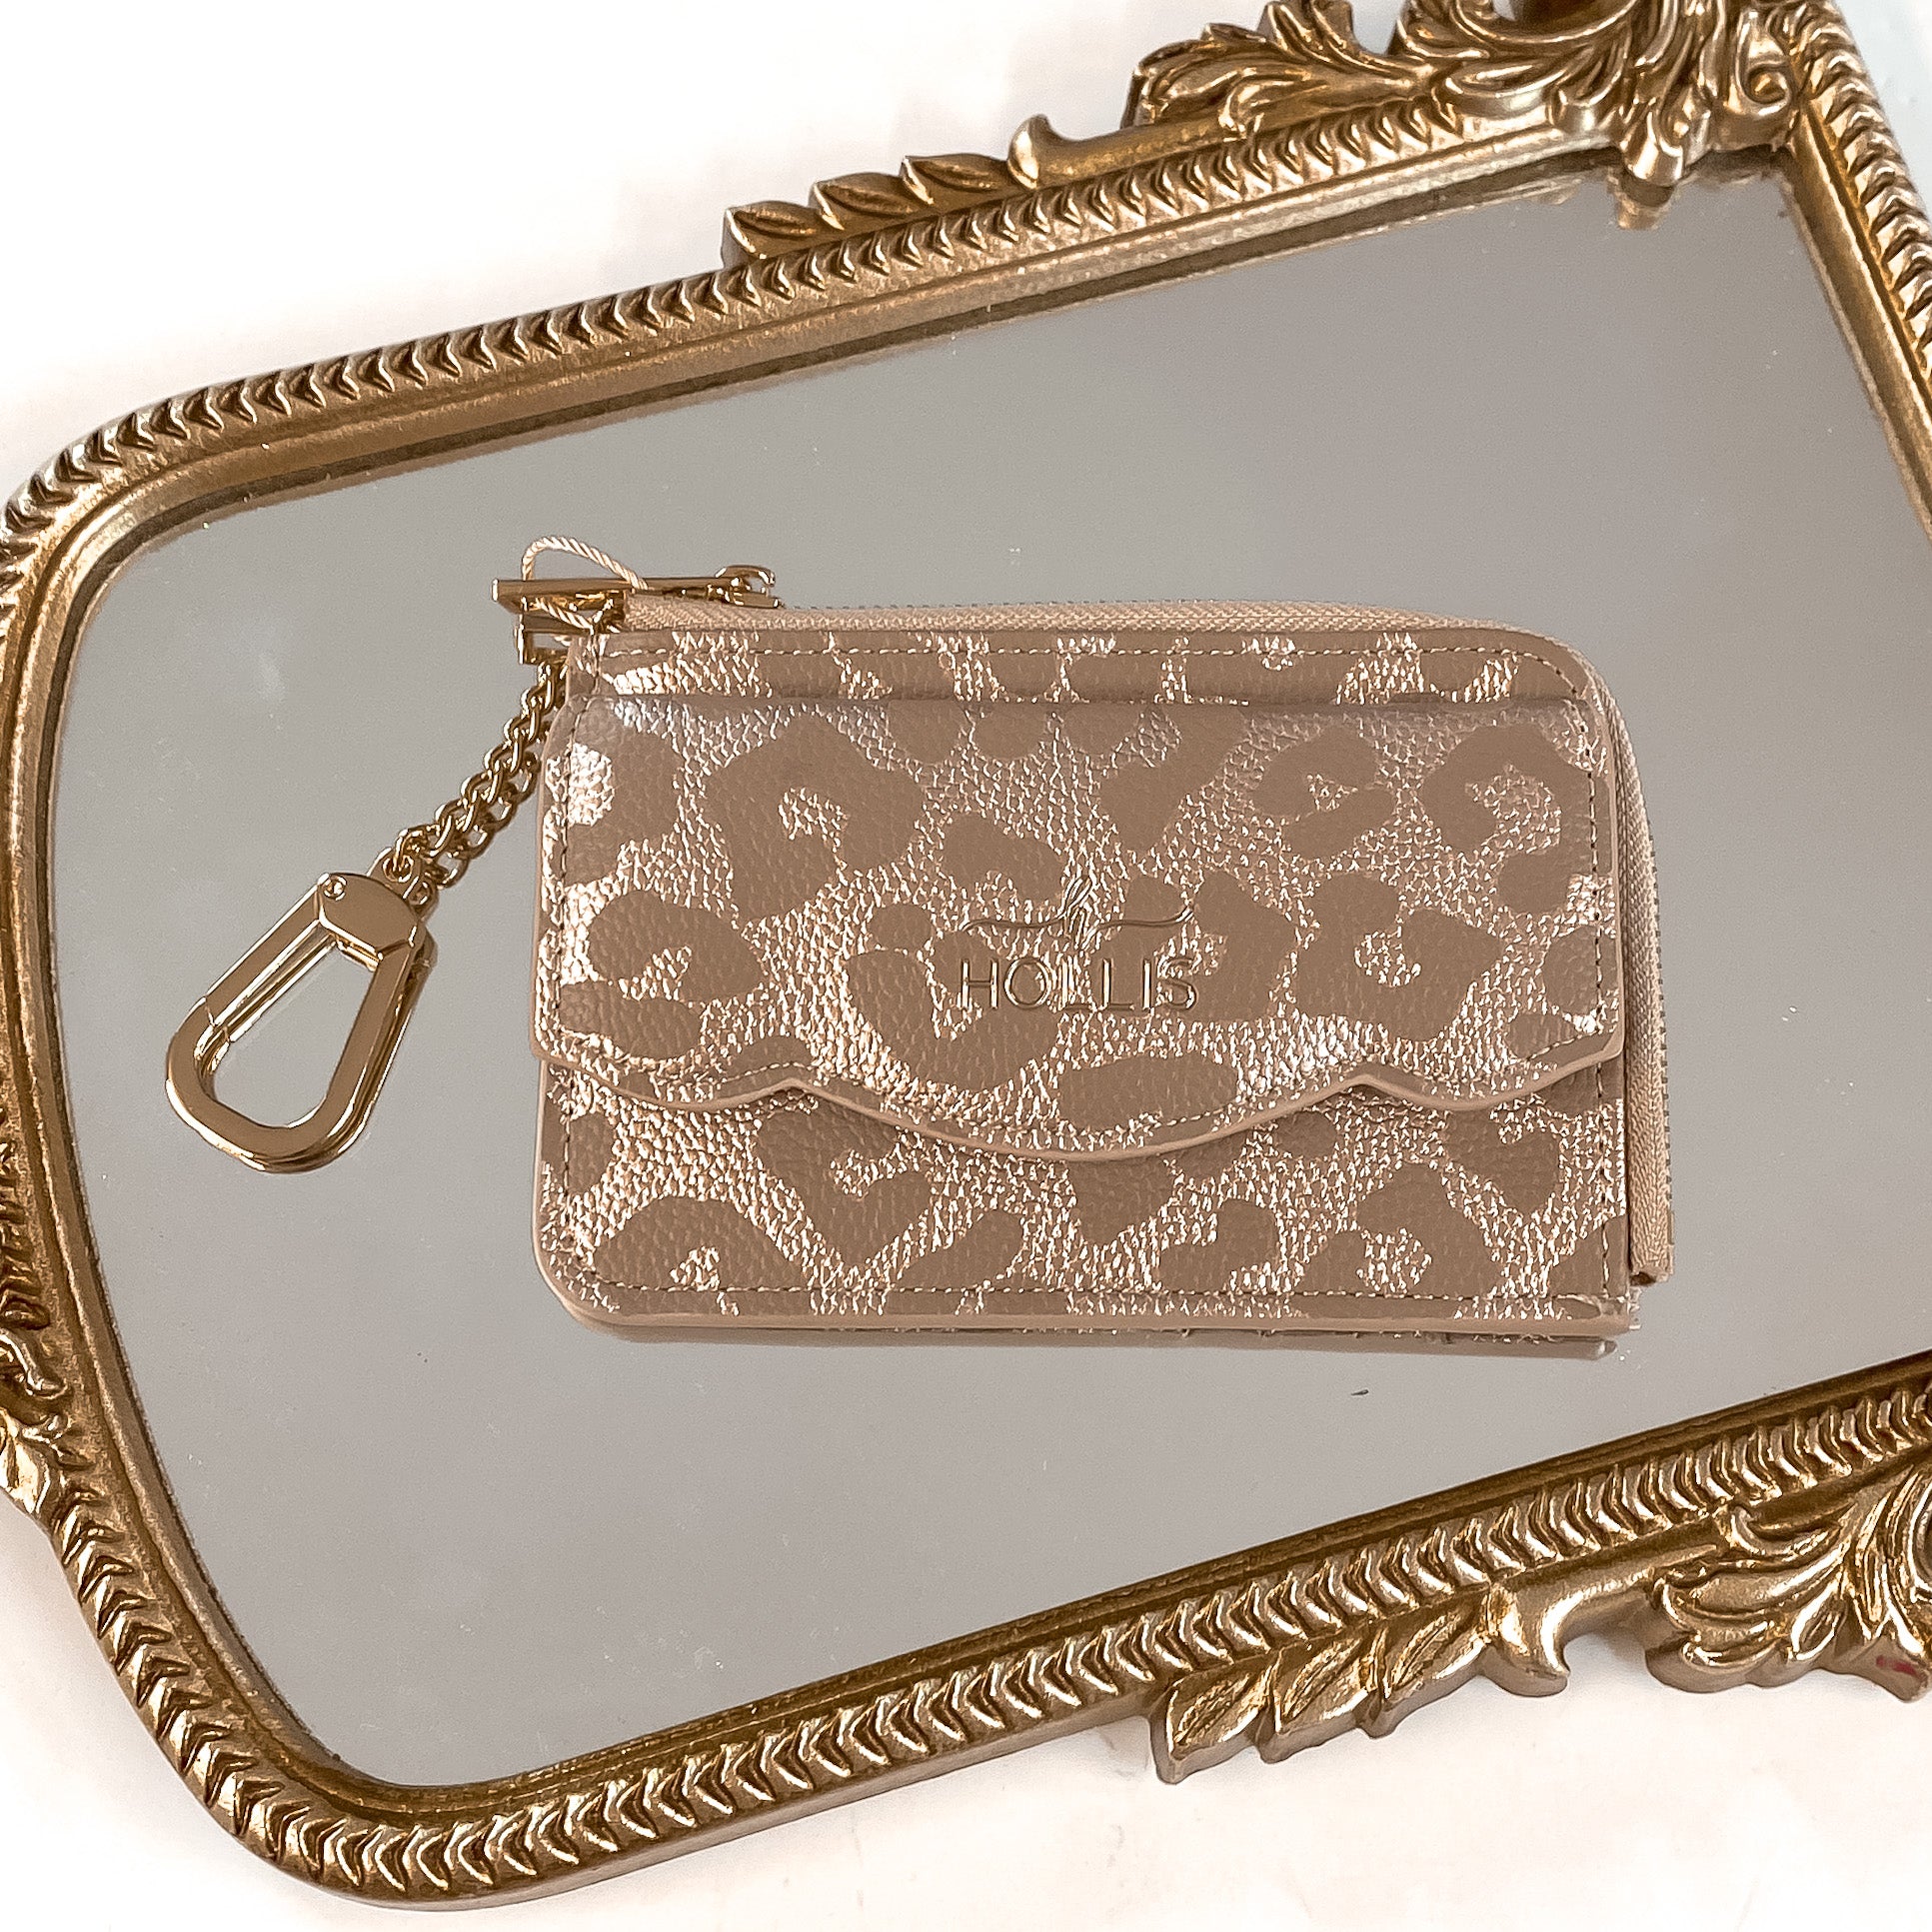 Hollis brand card holder wallet in Leopard. Wallet also has a gold chain connected to it. Pictured on a mirror with a gold frame.